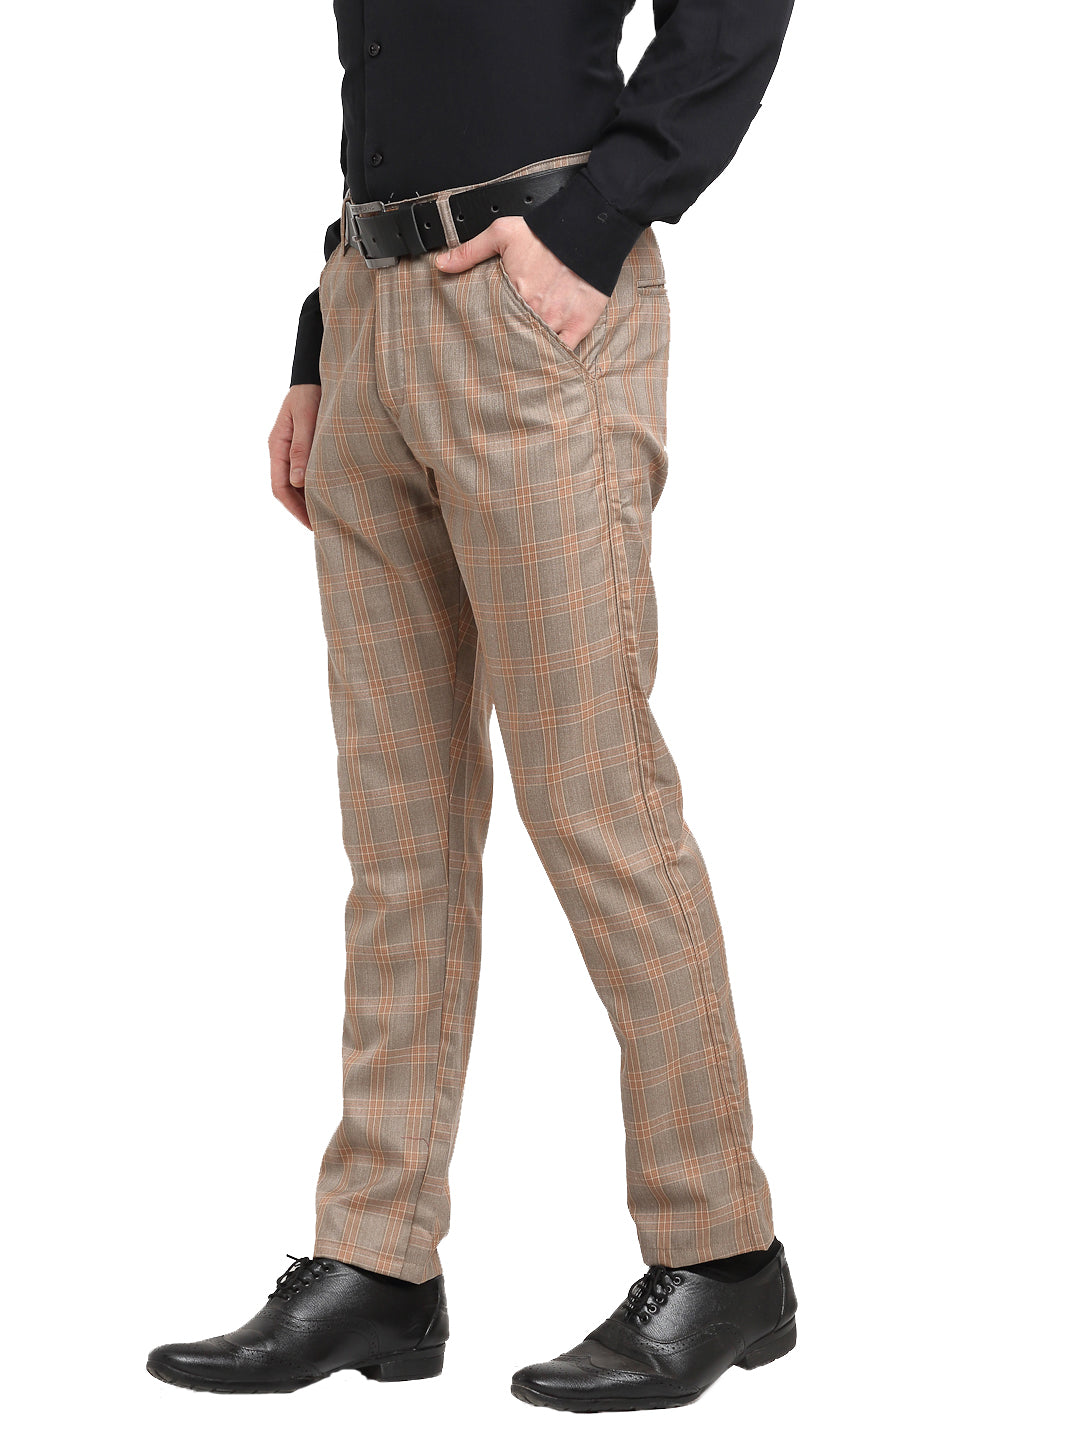 Mens Plaid Check Formal Harem Pants Casual Work Slim Fit Stretch Suit  Trousers - Helia Beer Co